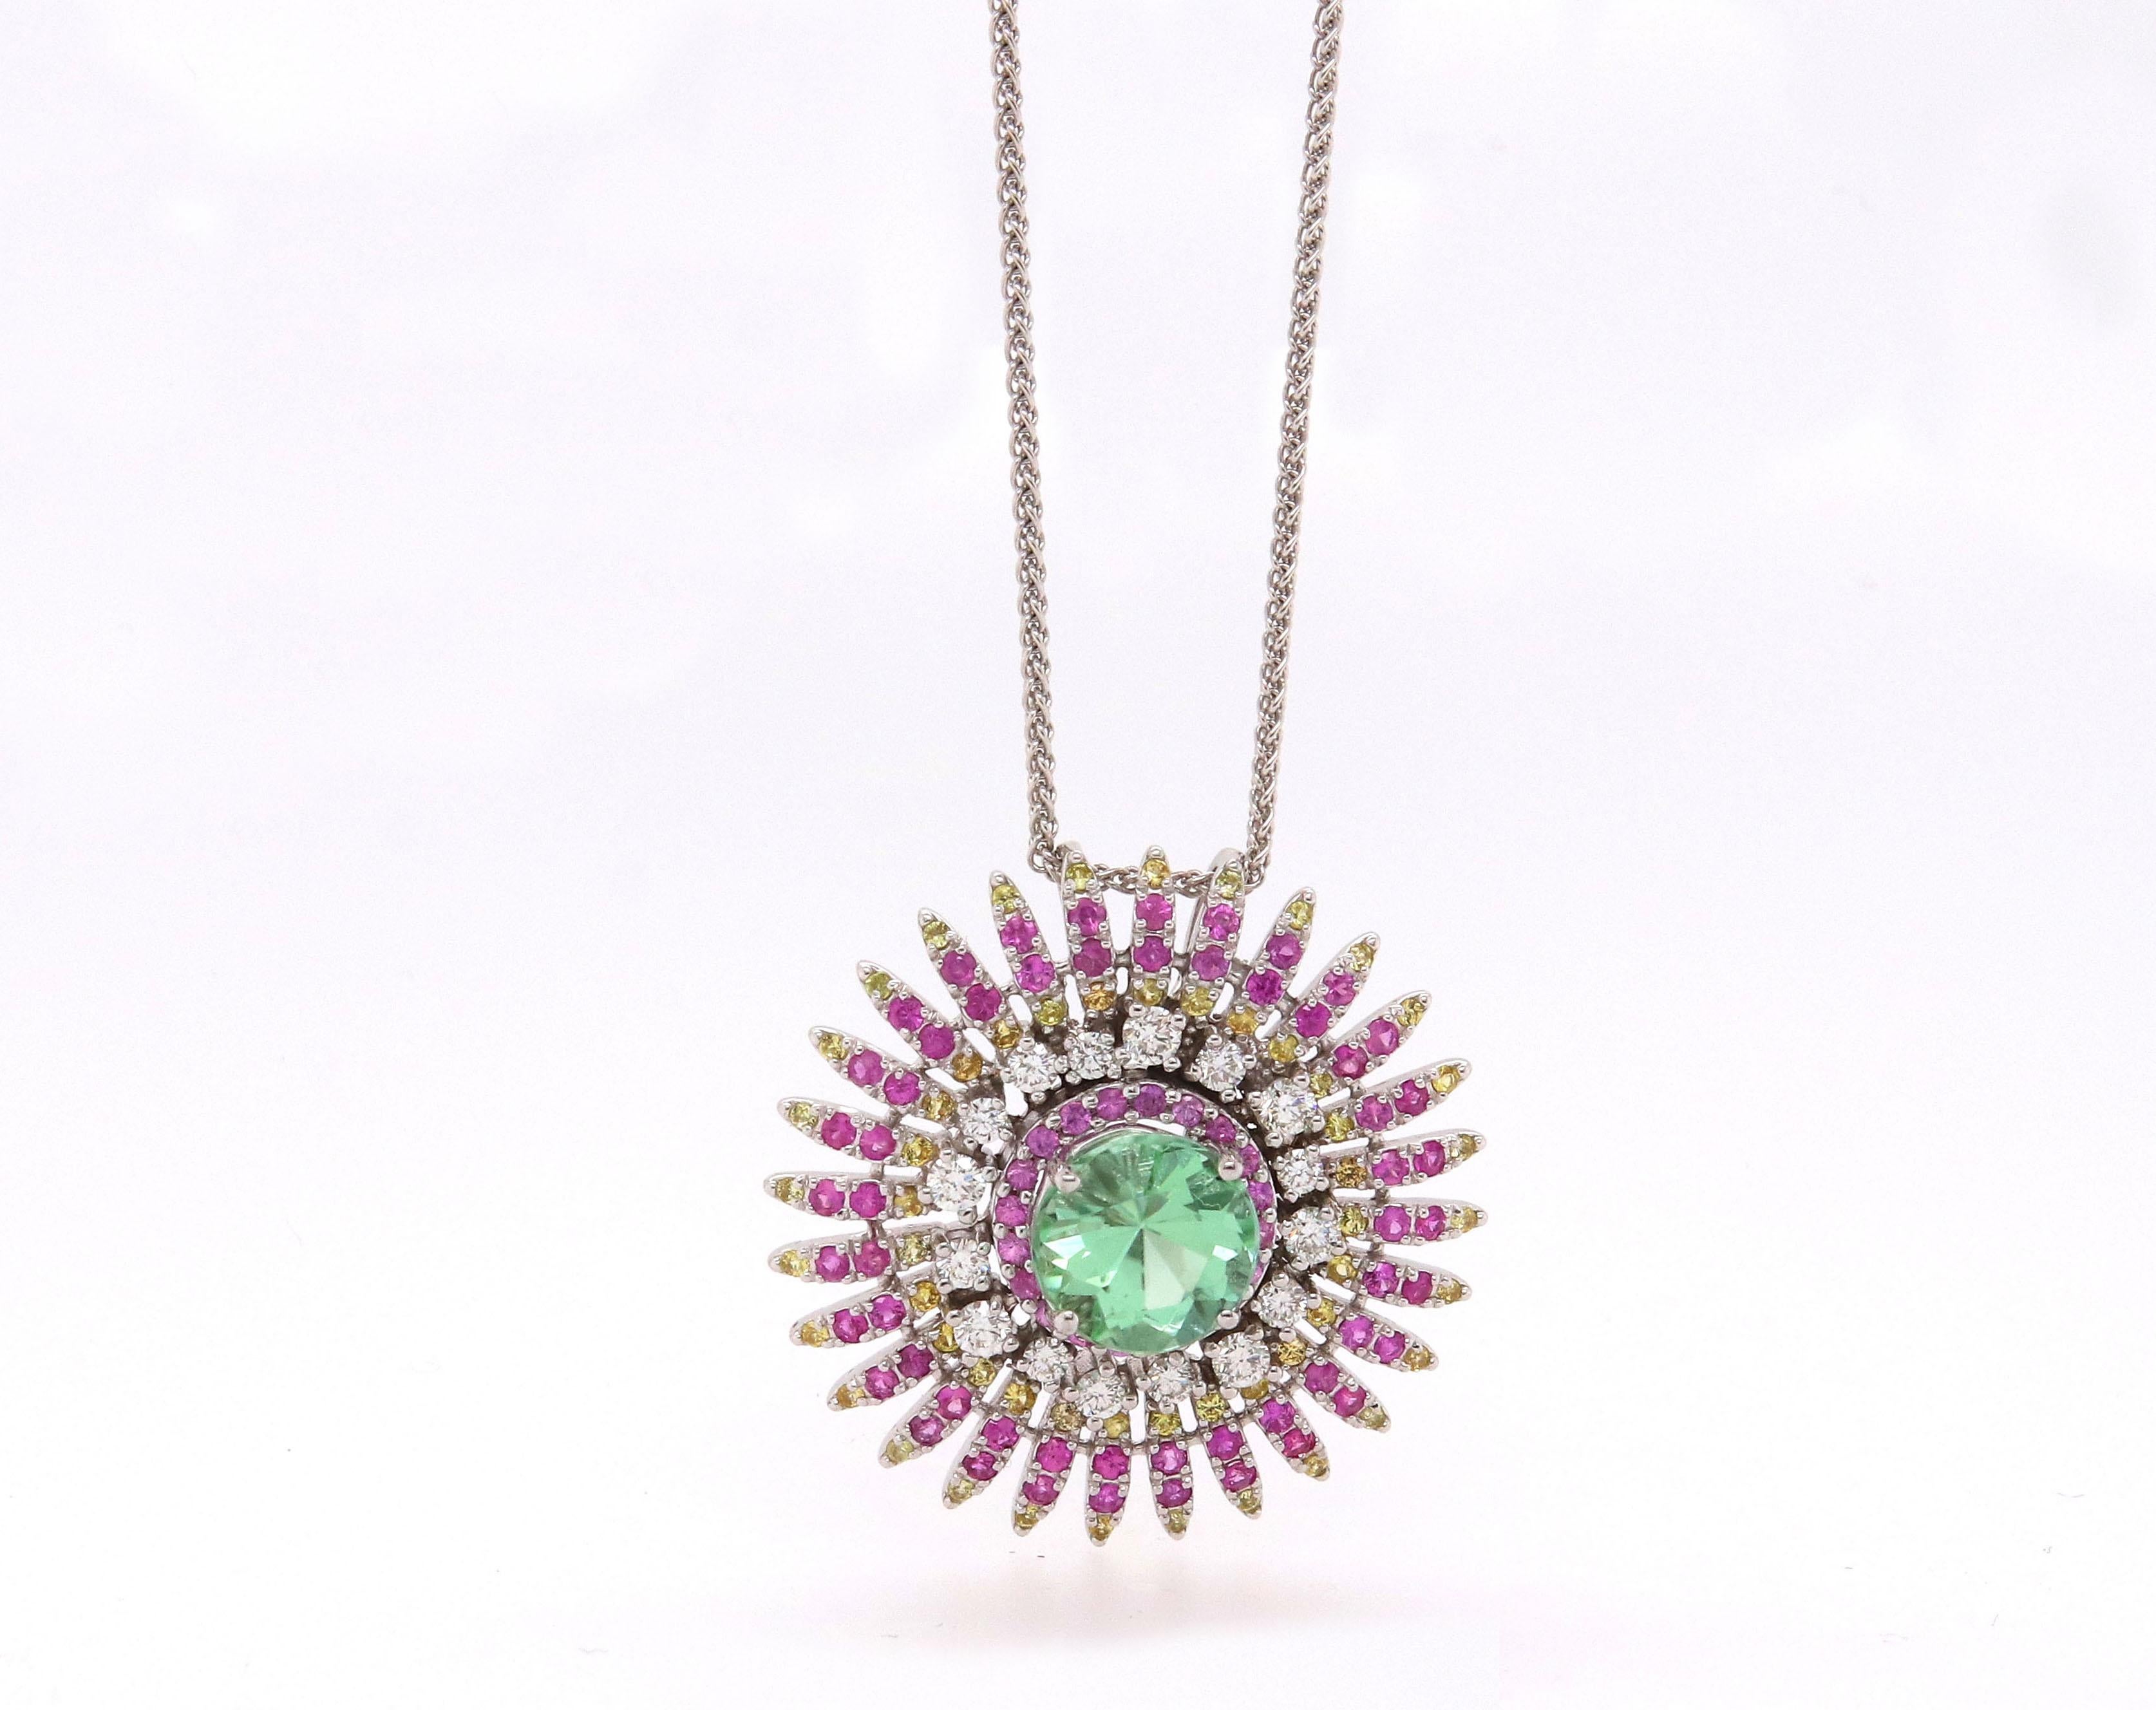 Material: 14k White Gold 
Center Stone Details: 1 Round Green Tourmaline at 2.18 Carats- Measuring 8 mm
Mounting Stone Details: 76 Round Pink Sapphires at 0.86 Carats
Mounting Stone Details: 59 Round Yellow Sapphires at 0.39 Carats
Diamond Details: 